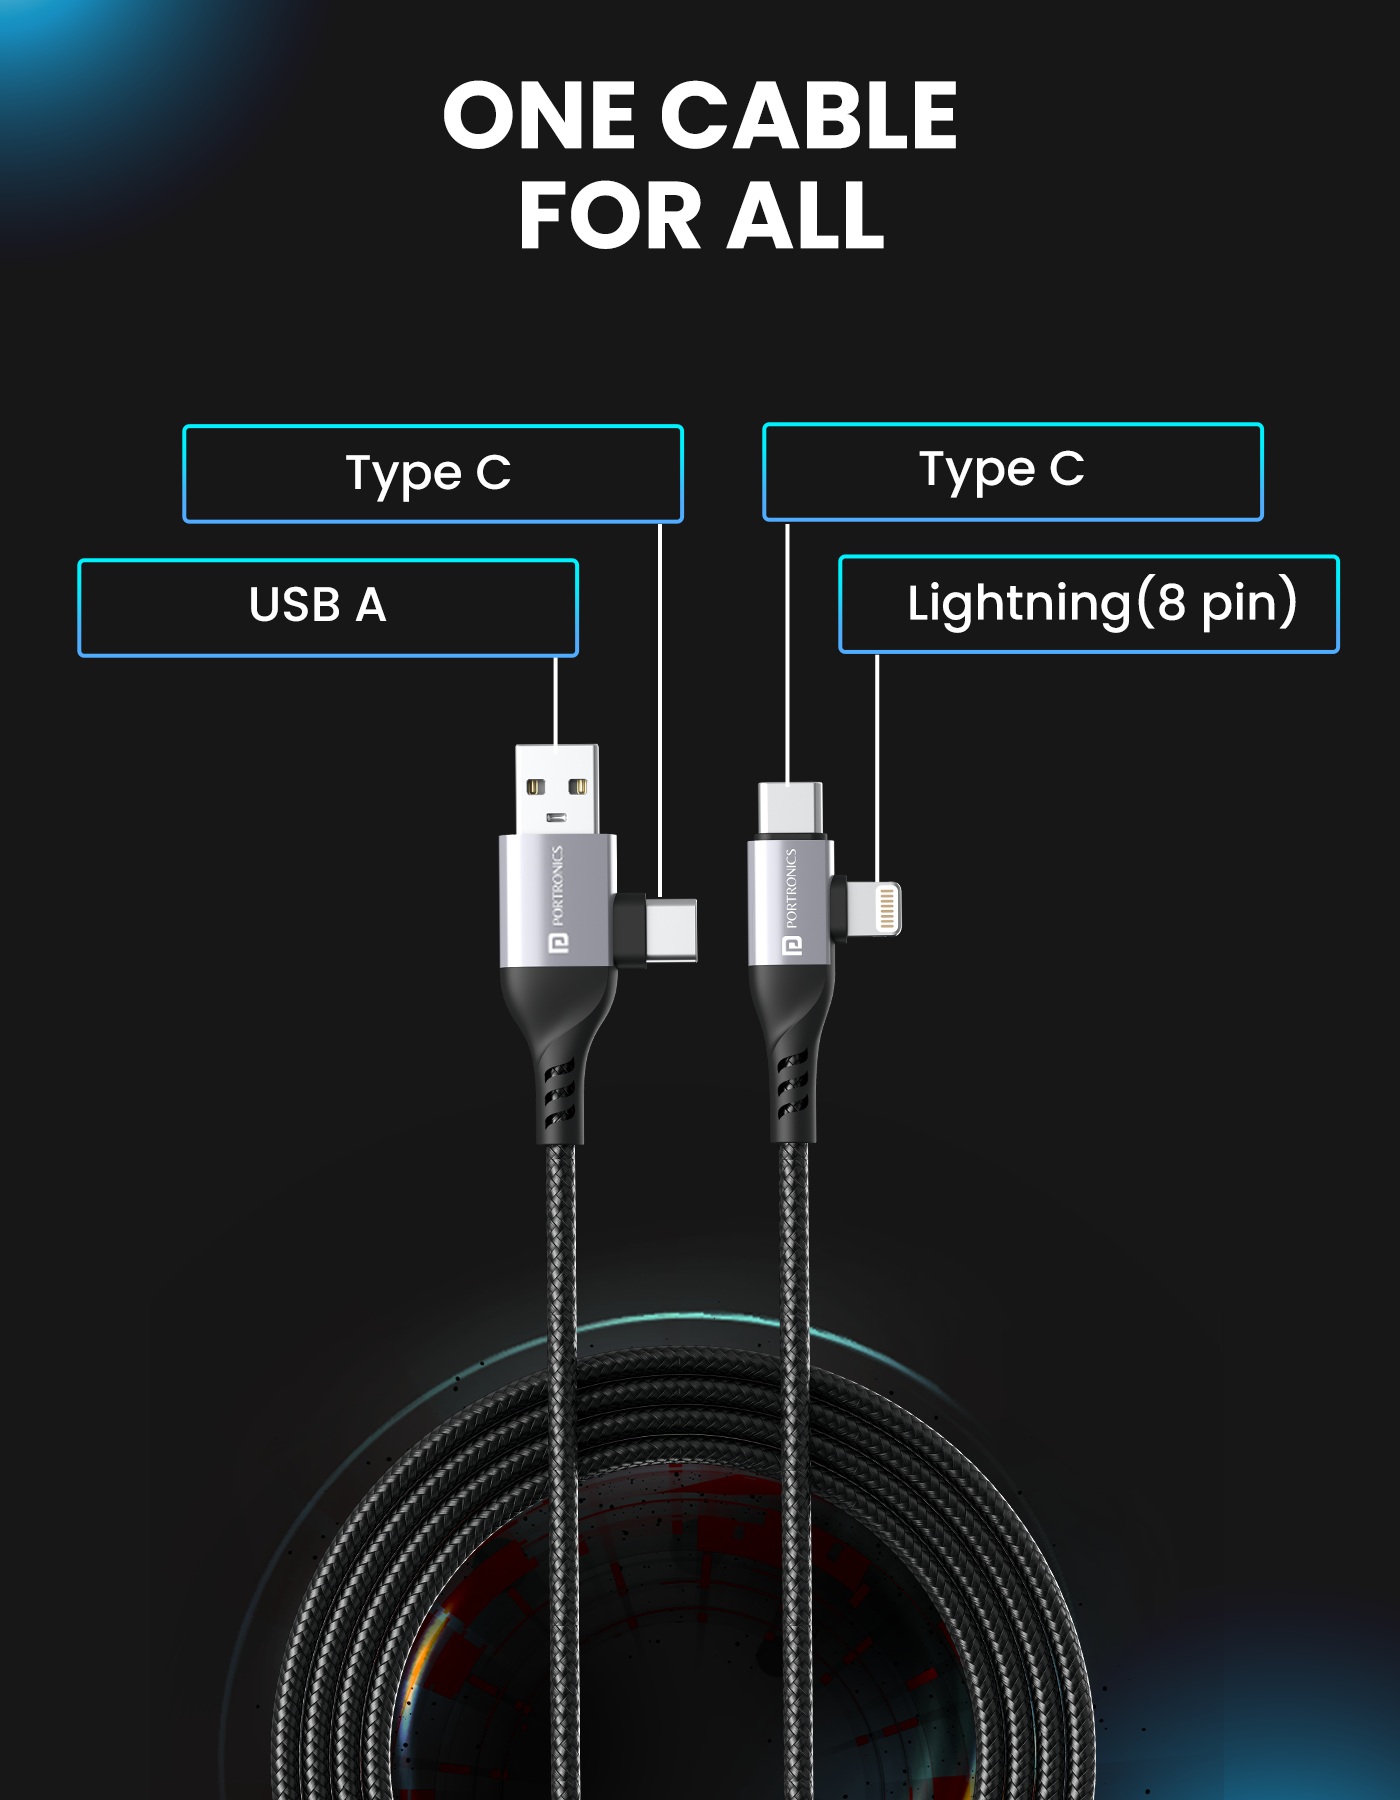 Portronics Konnect 4 in 1 cable with micro USB, iOS, & Type C